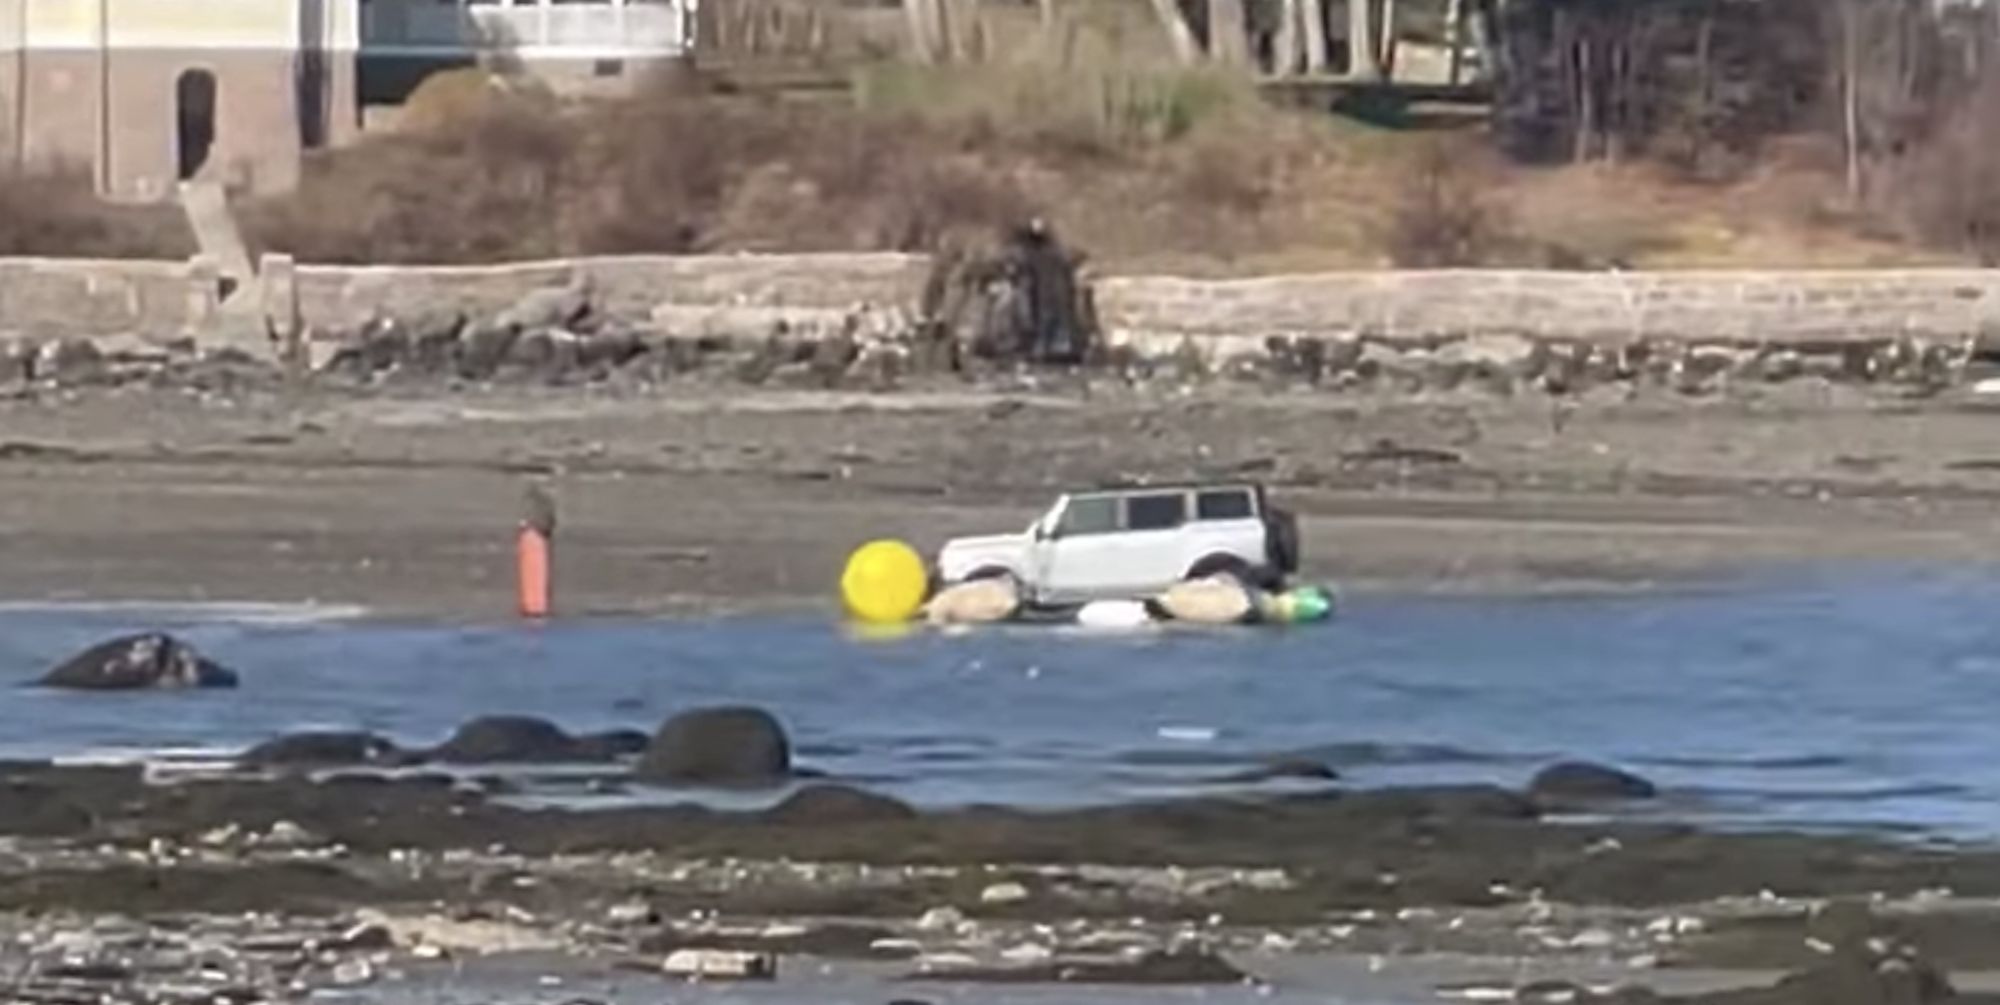 Here's What the Submerged Bronco Looked Like After It Was Pulled Ashore